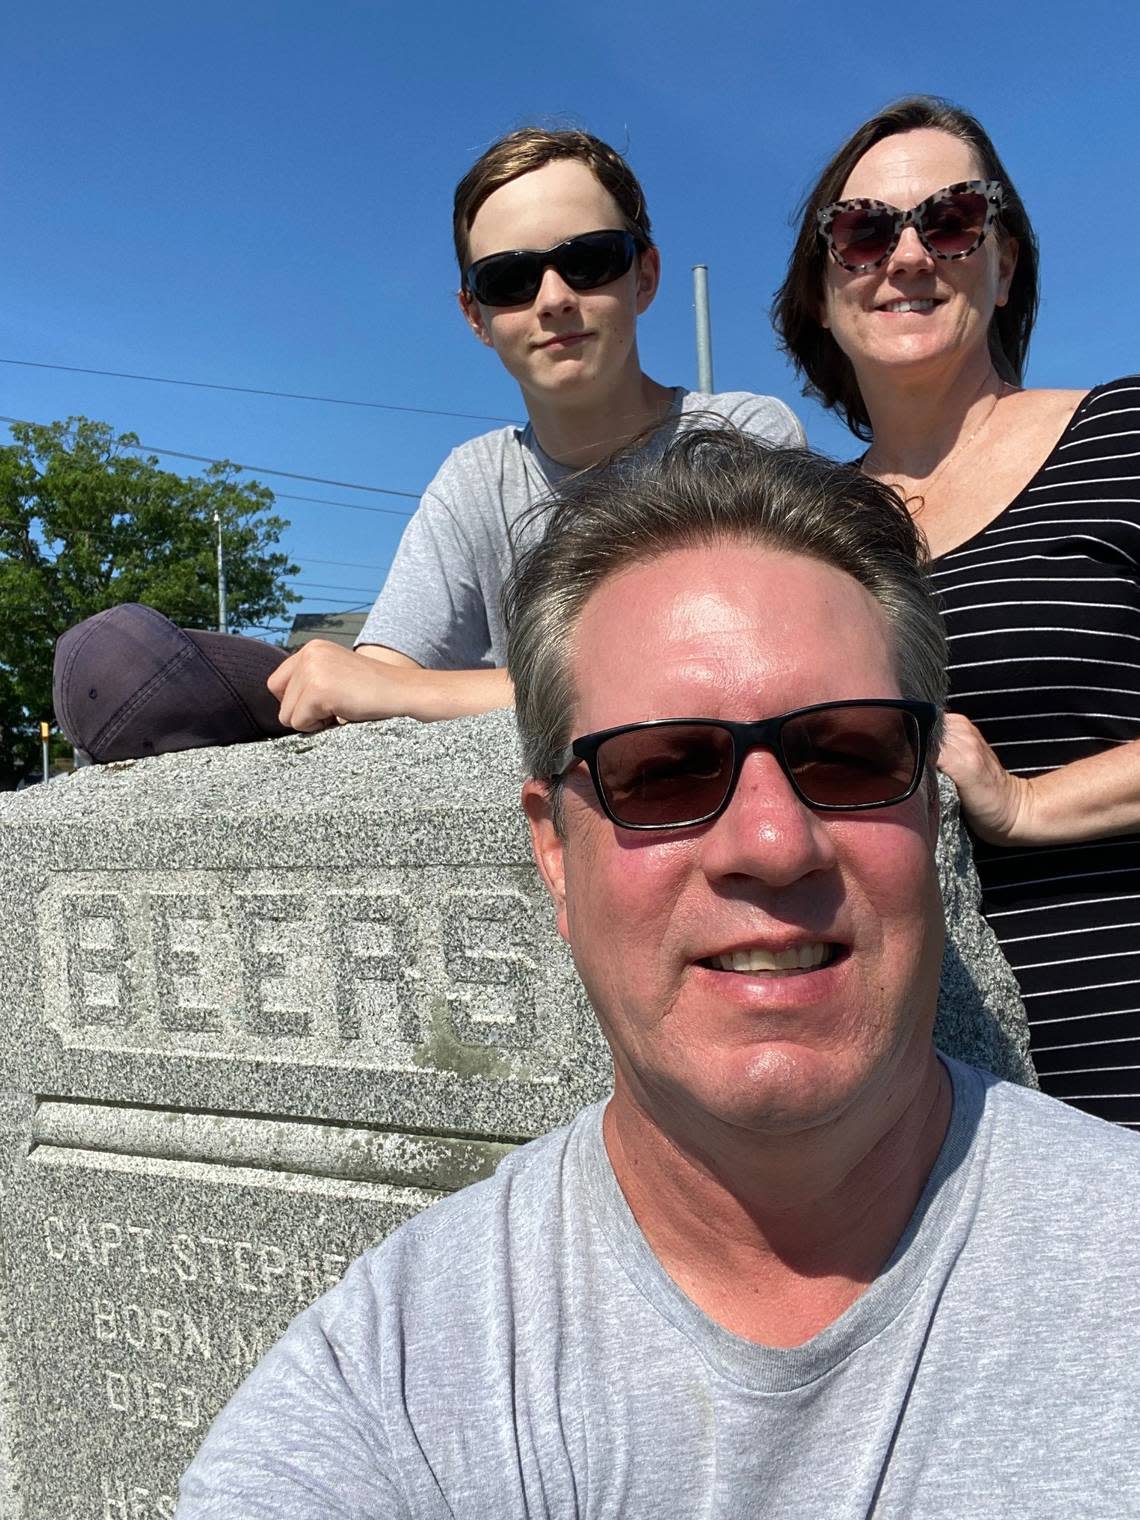 Josh Shaffer with his son, Sam, and his wife, Amber Nimocks. They’re at the grave of Capt. Beers in Delaware.